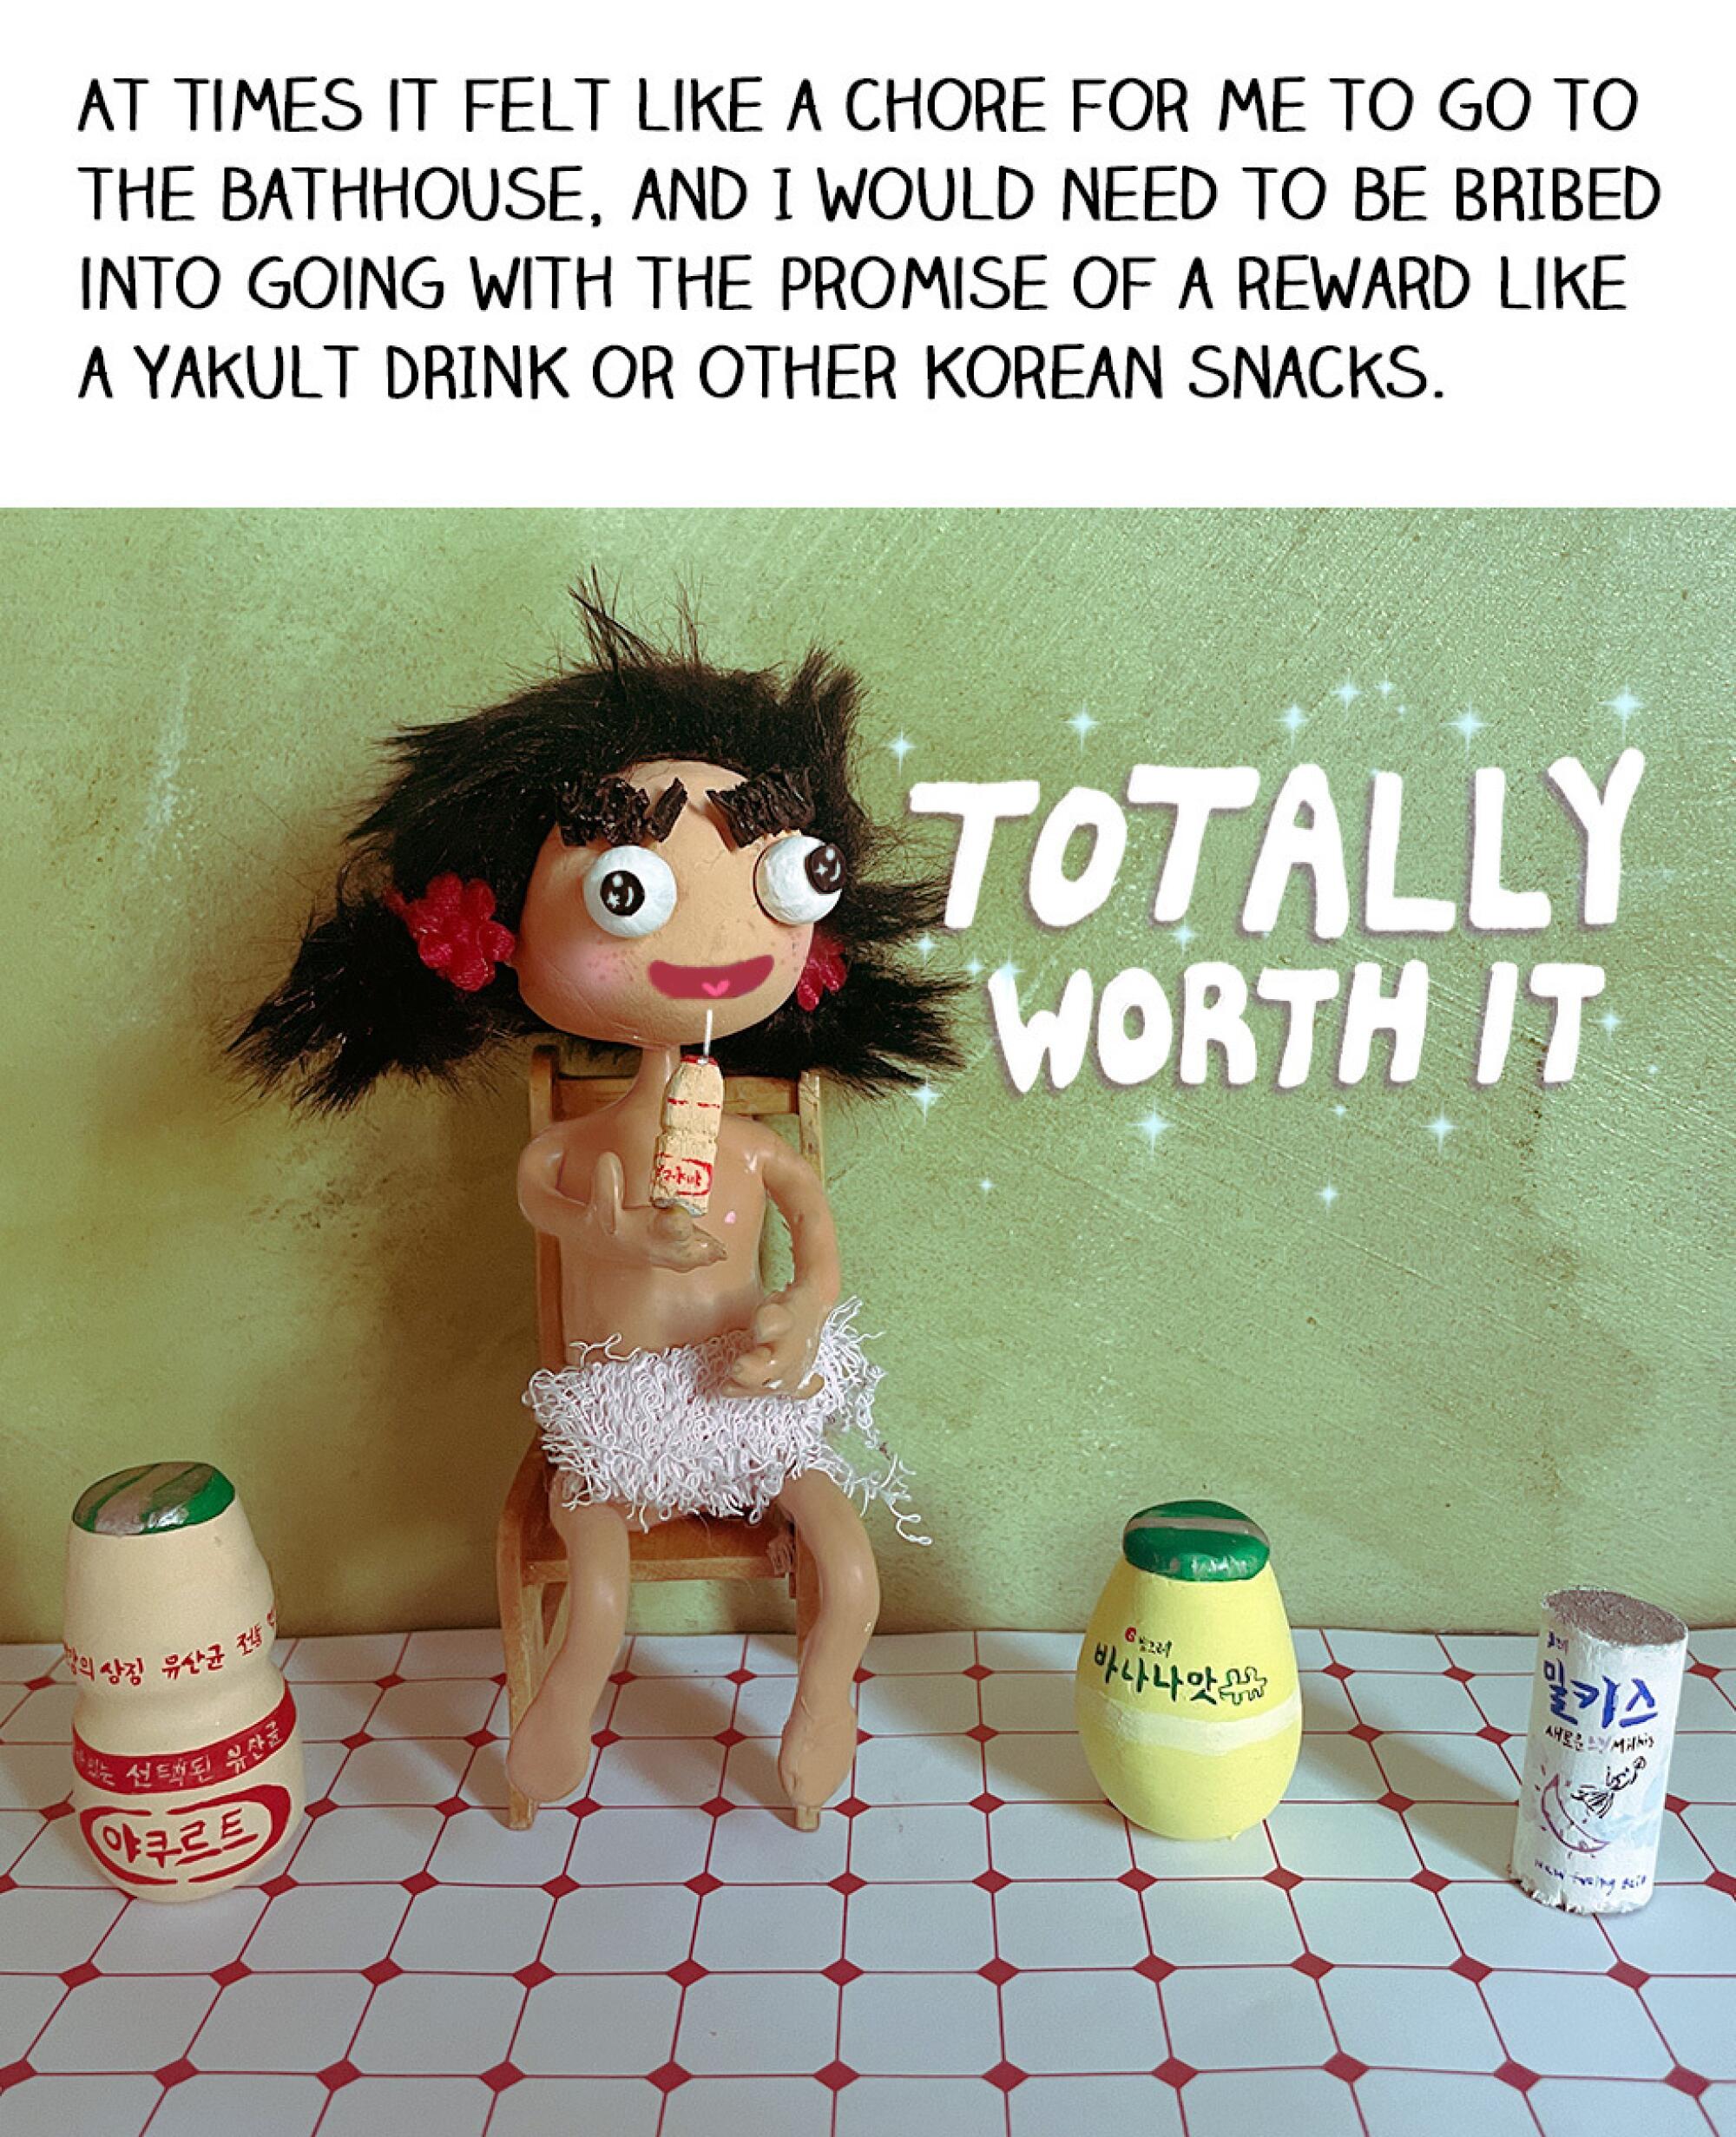 A child puppet surrounded by different yogurt beverages while drinking one.